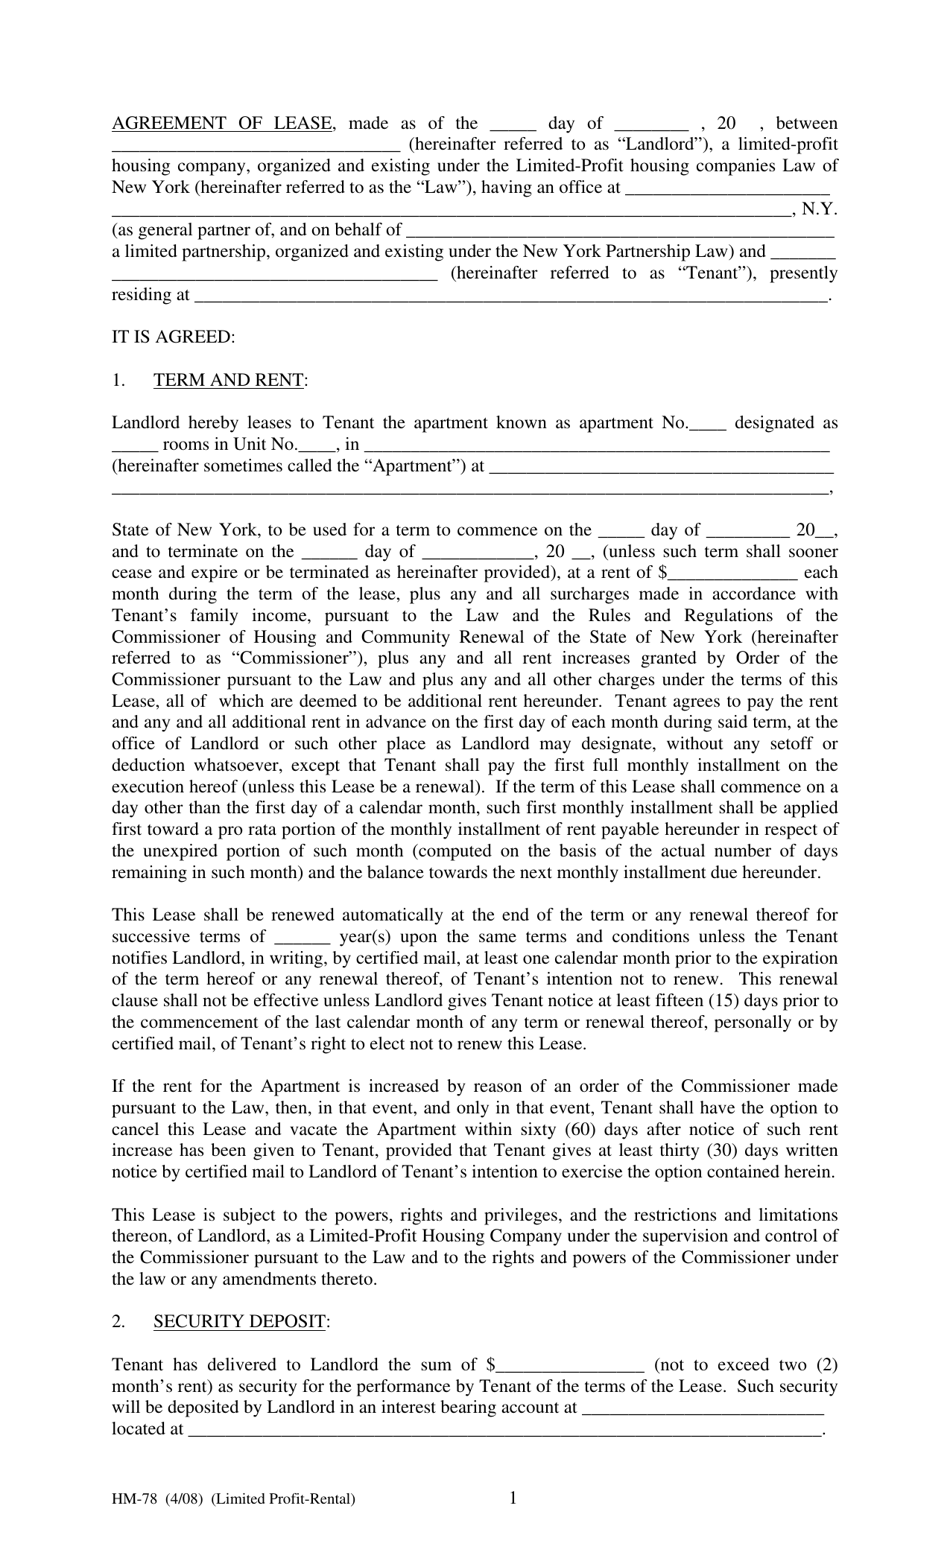 Form HM-78 Agreement of Lease, Limited Profit Rental - New York, Page 1